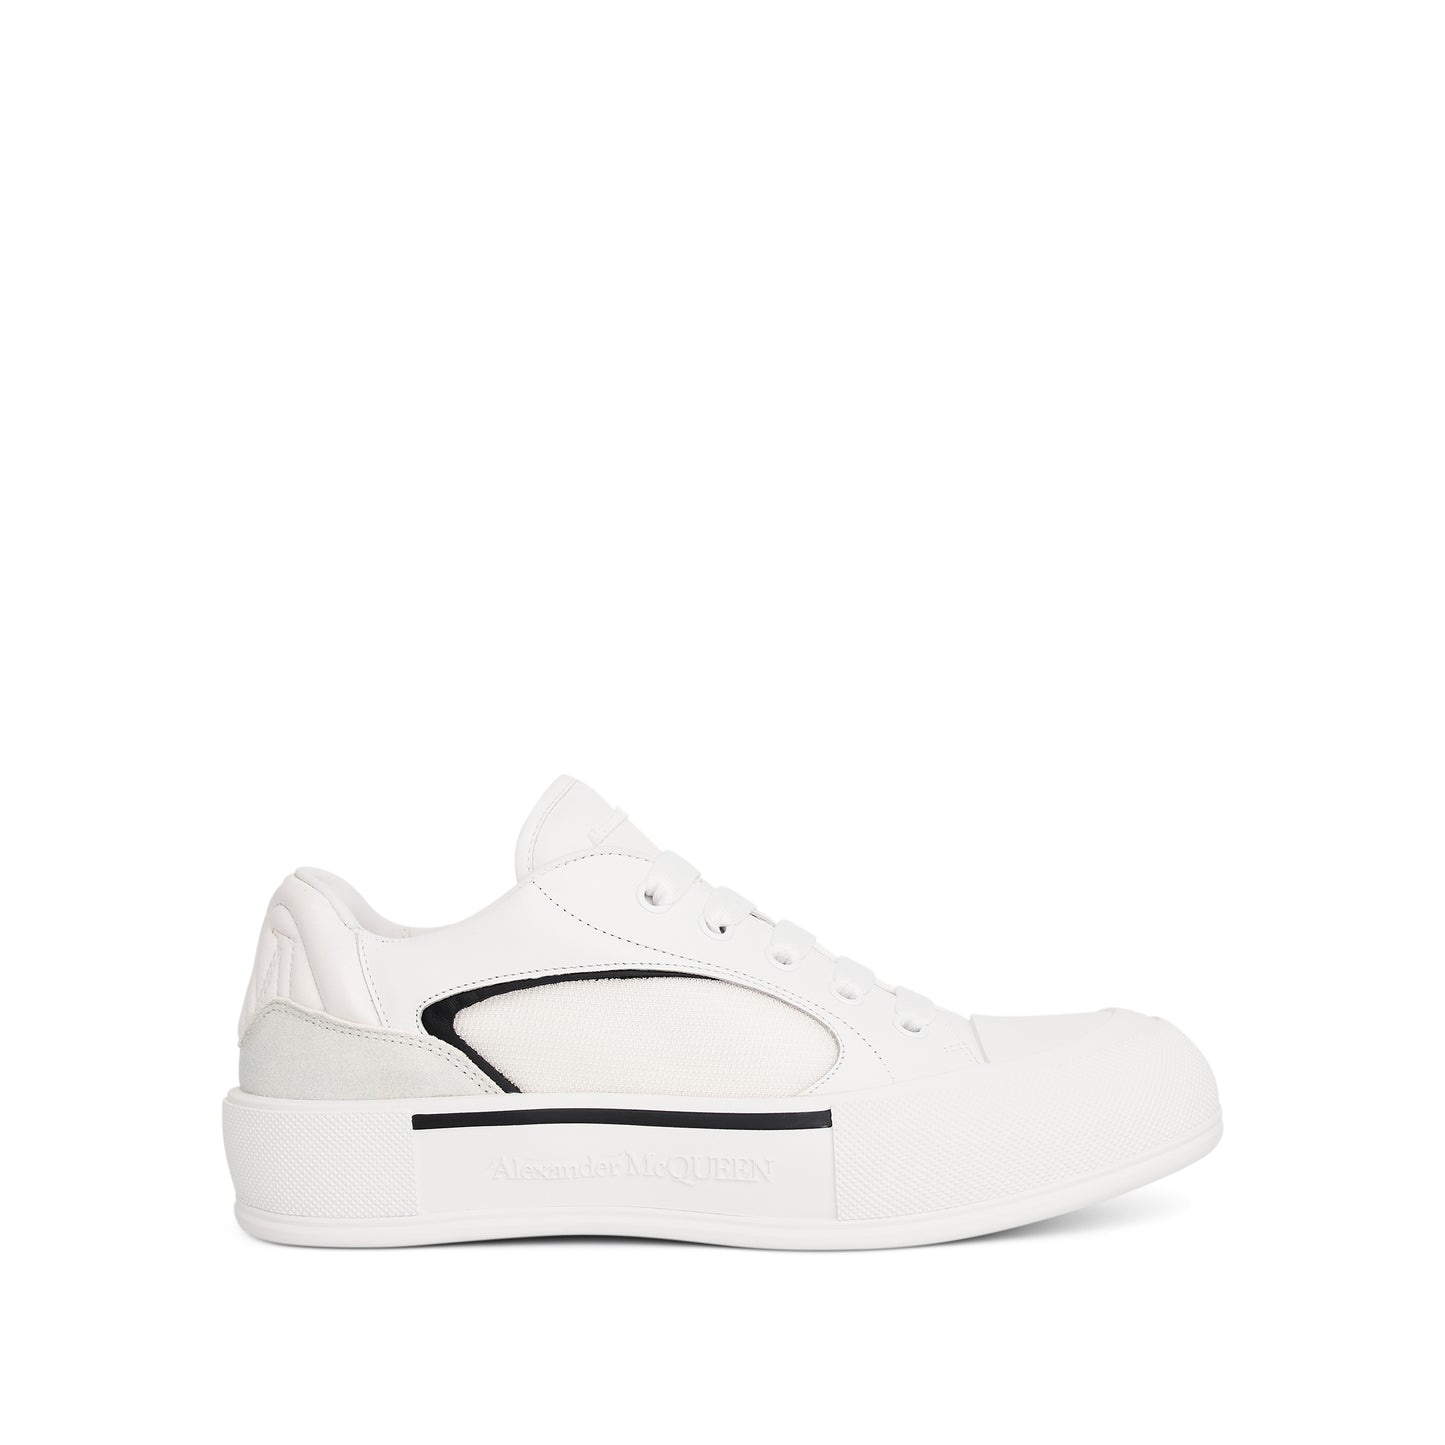 New Deck Lace-Up Plimsoll Sneaker in White/Black